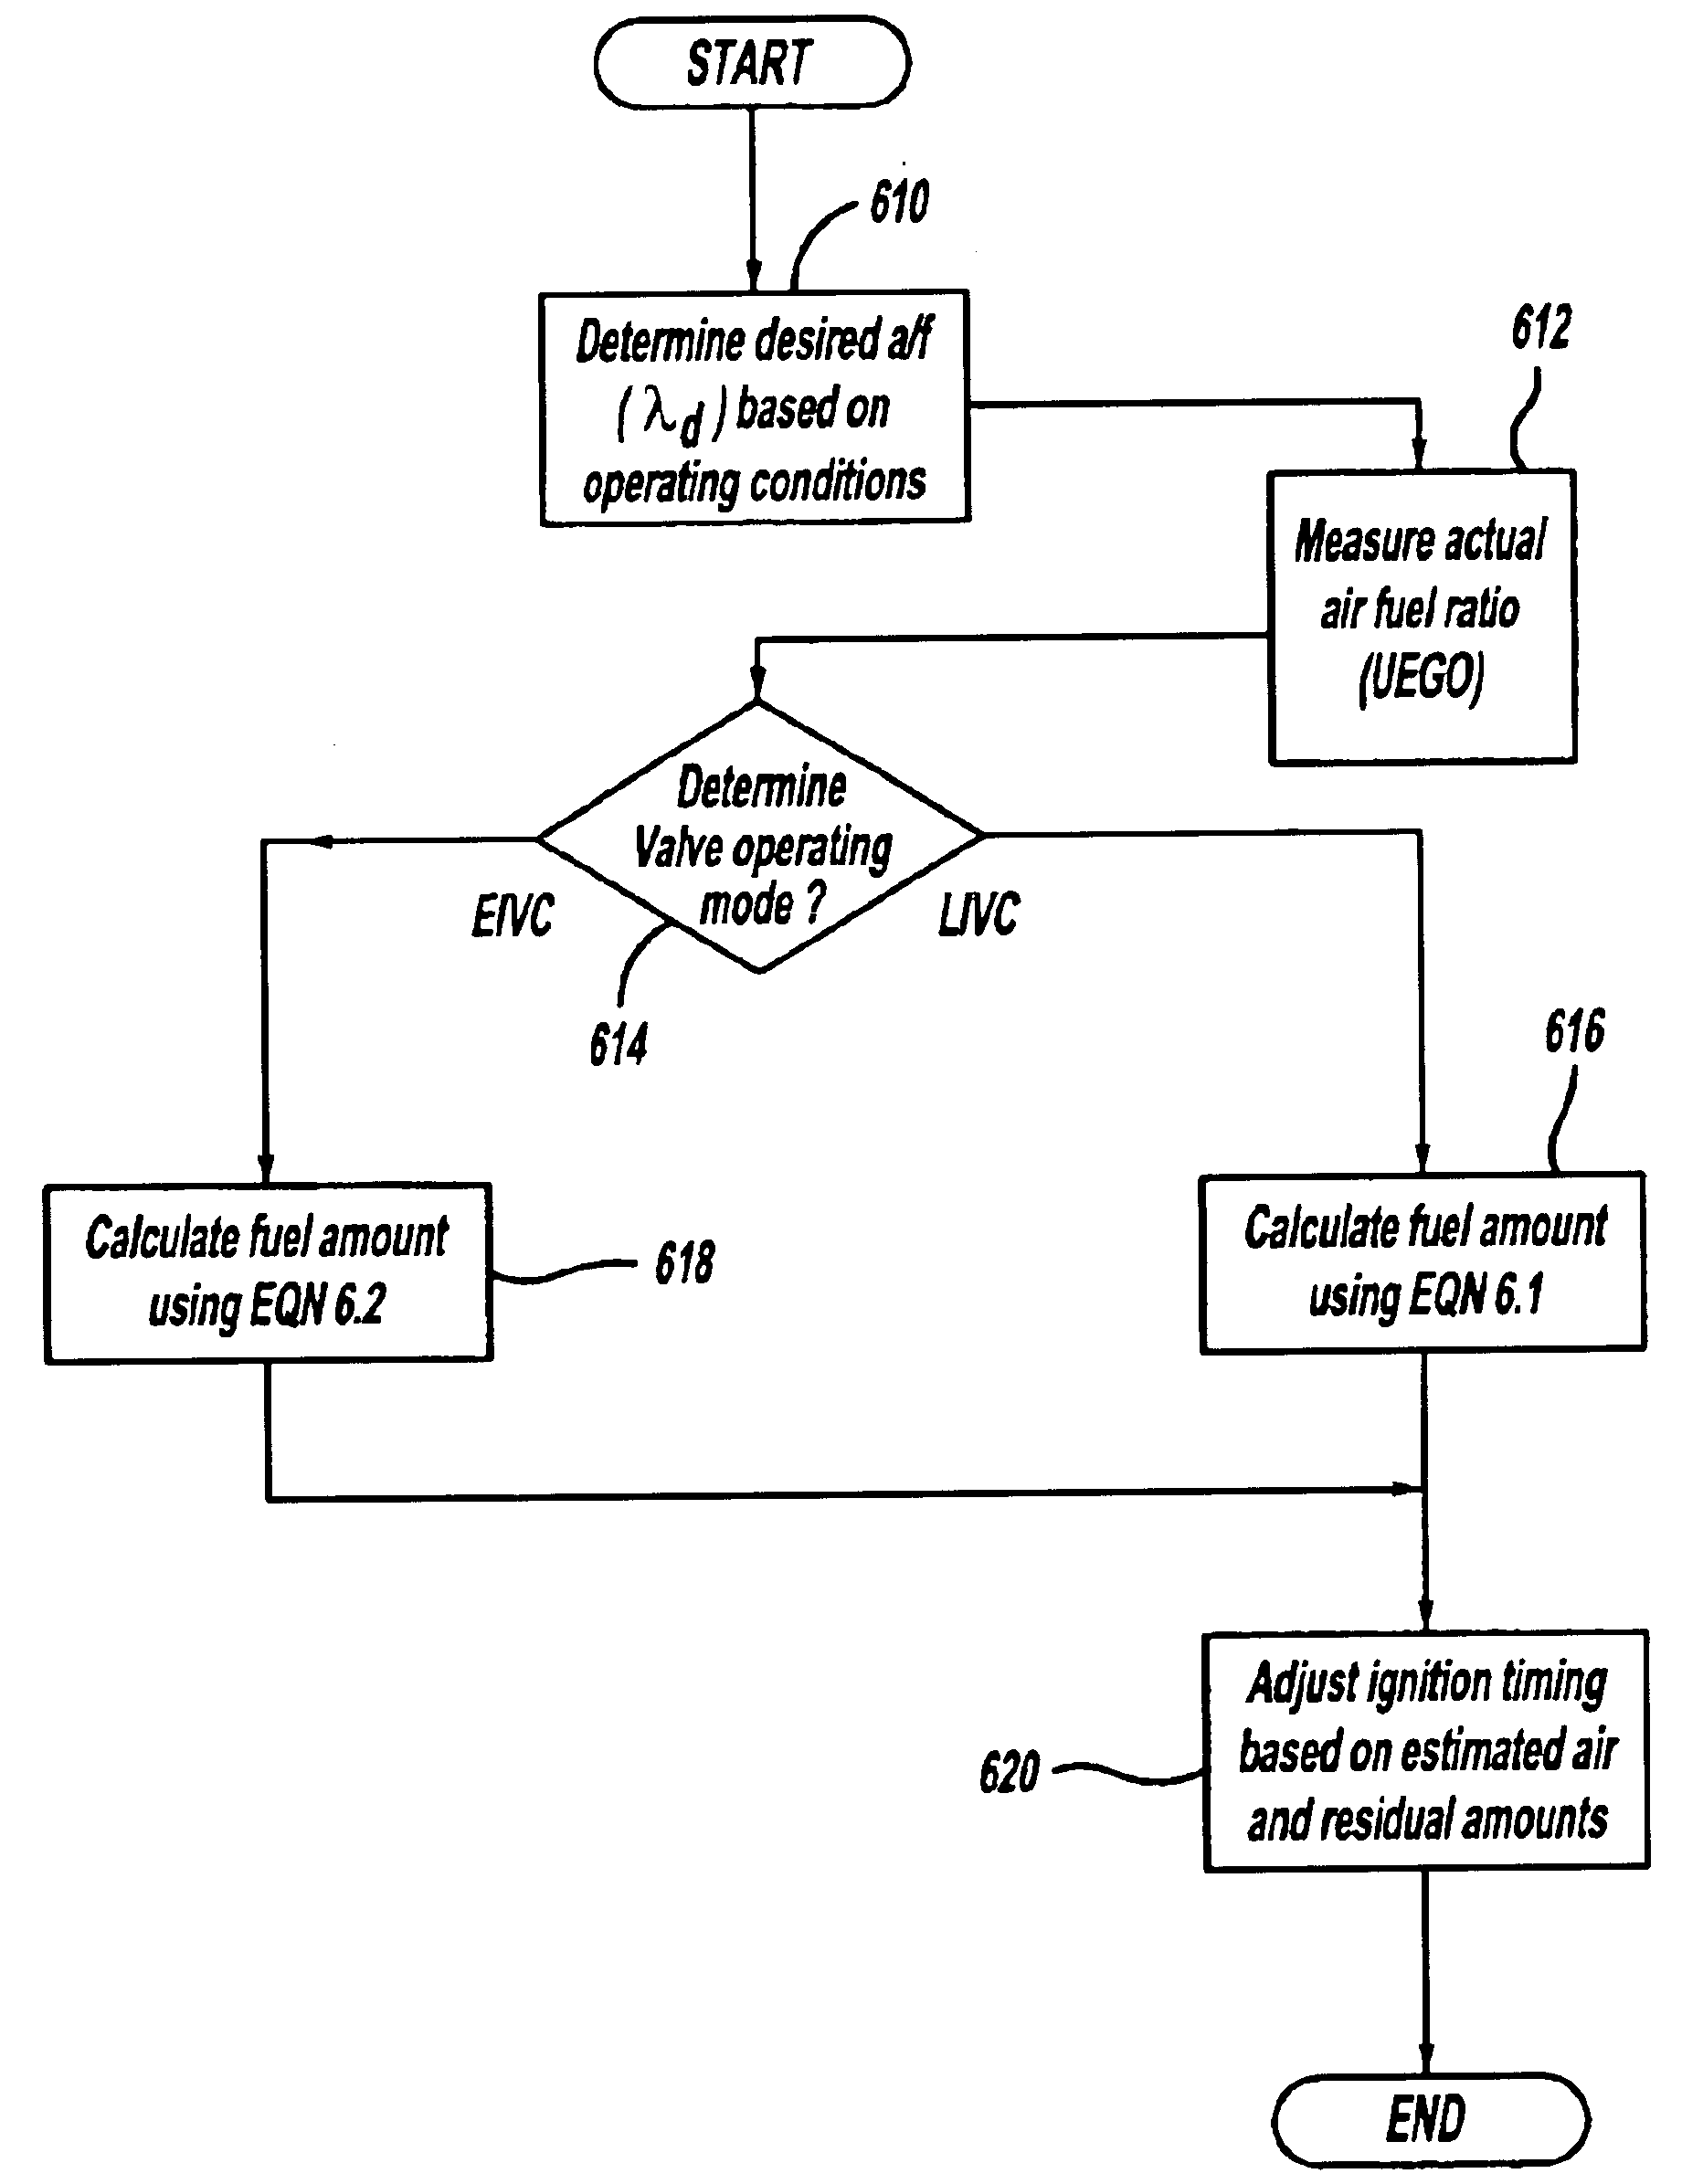 Computer controlled engine valve operation